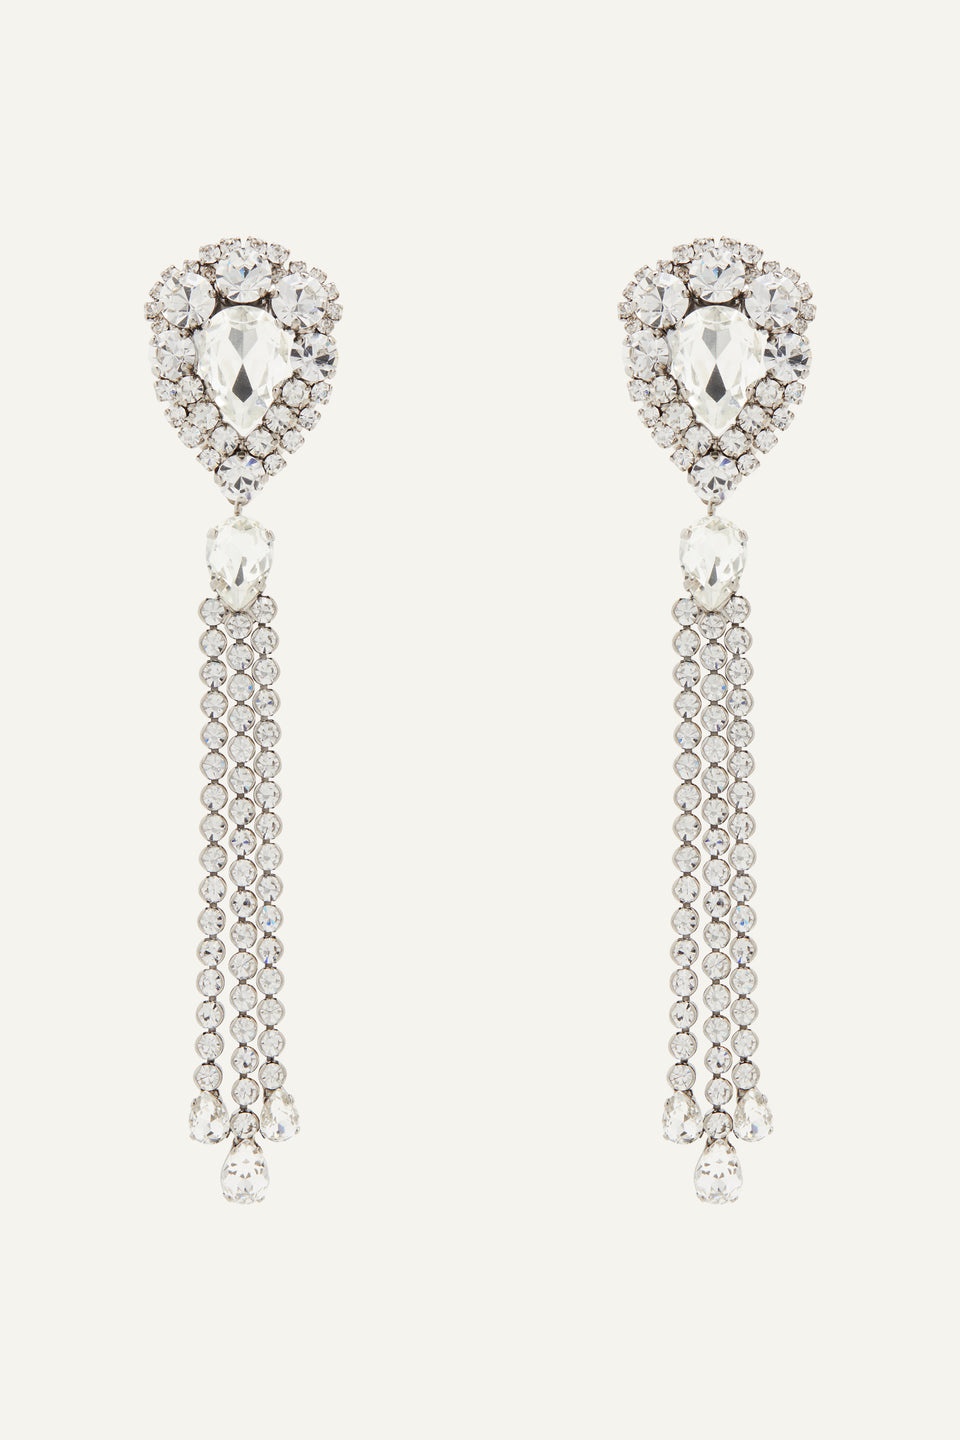 CRYSTAL EARRINGS WITH FRINGES - 1